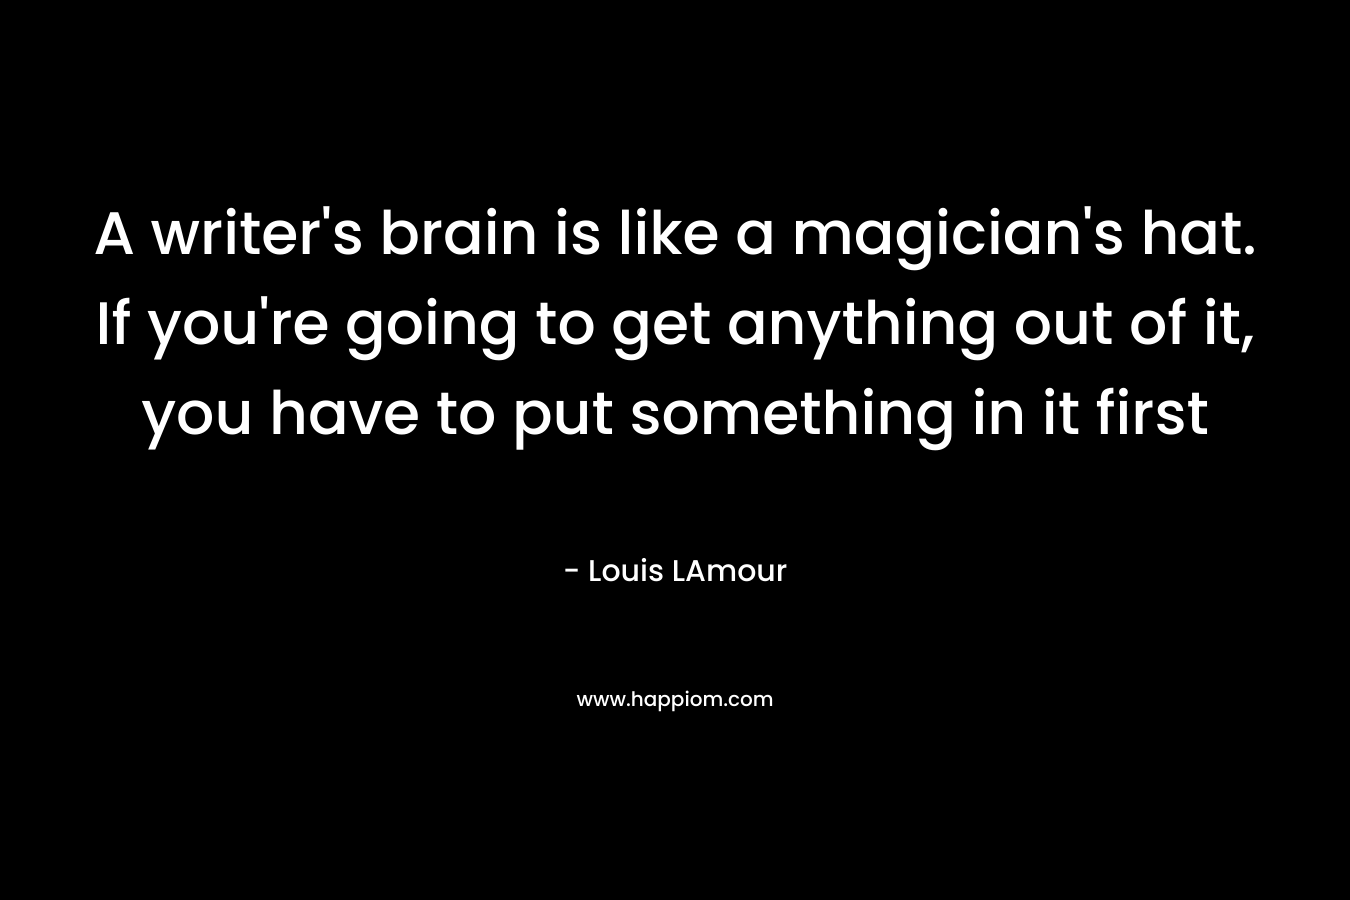 A writer's brain is like a magician's hat. If you're going to get anything out of it, you have to put something in it first